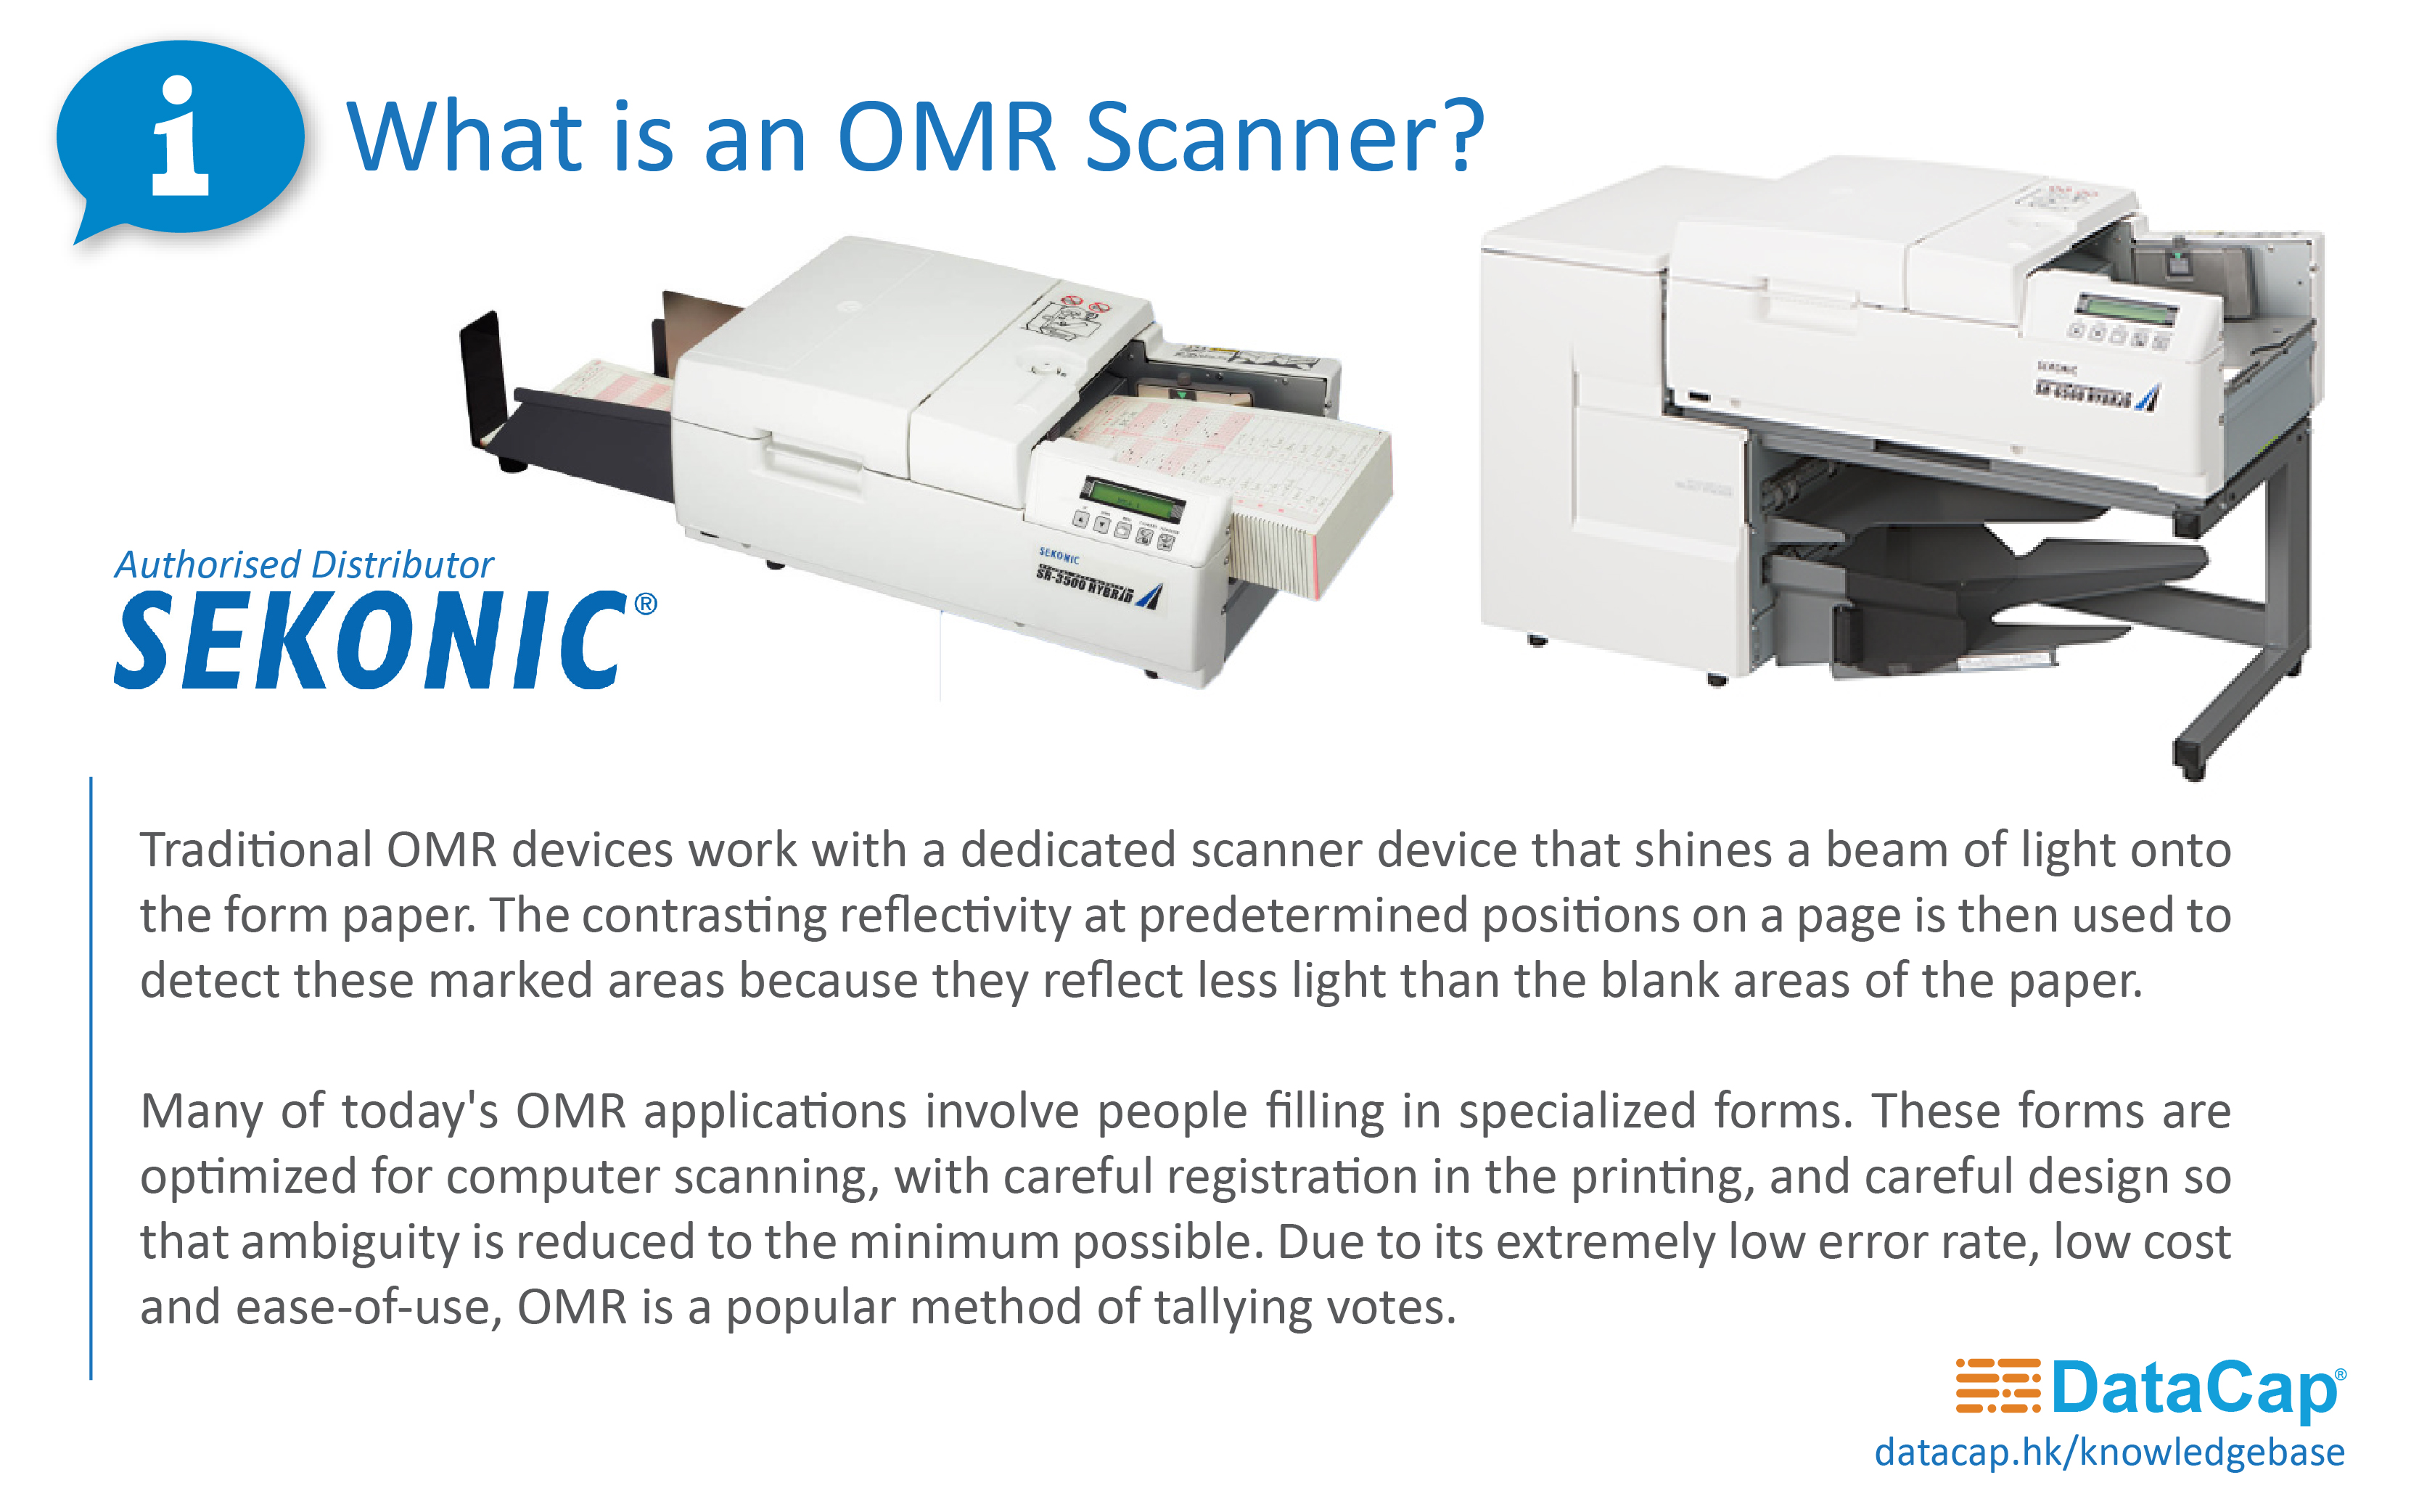 What Is OMR?